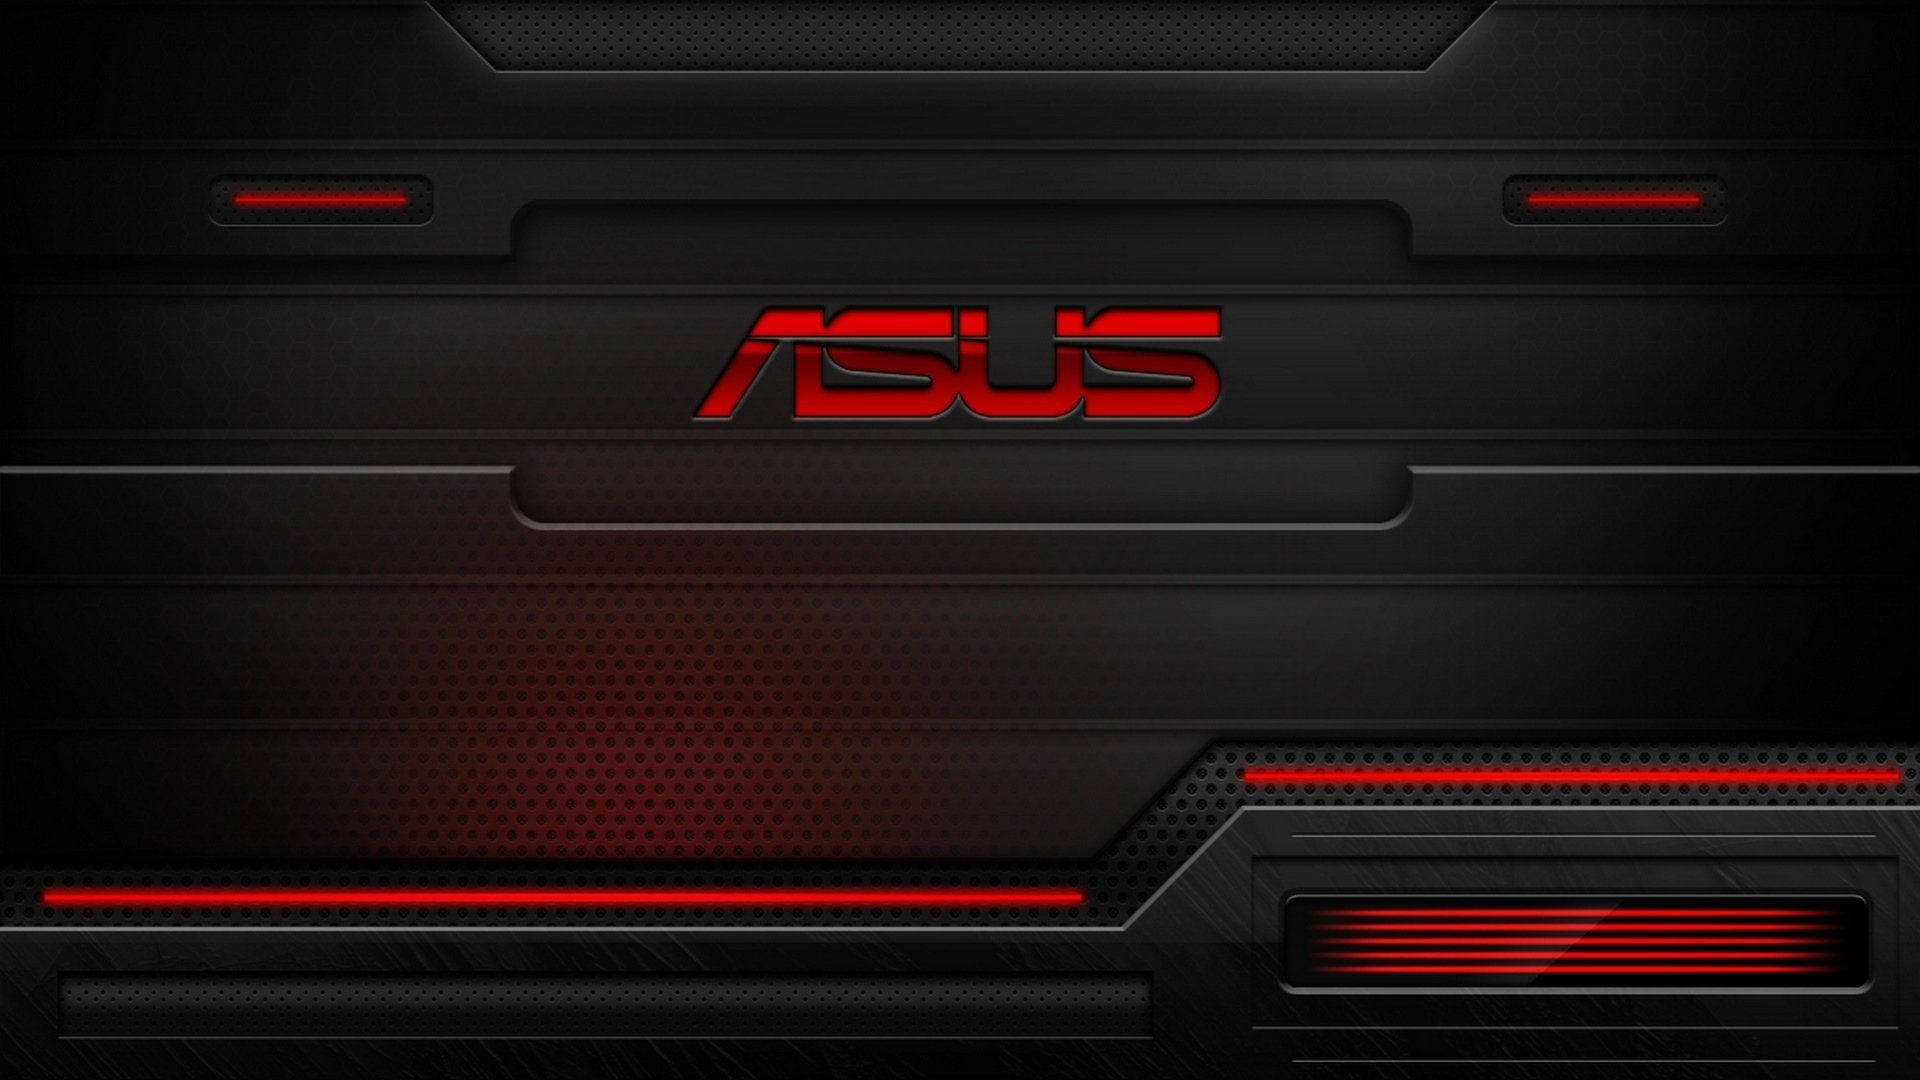 Asus Neon Red Logo Background